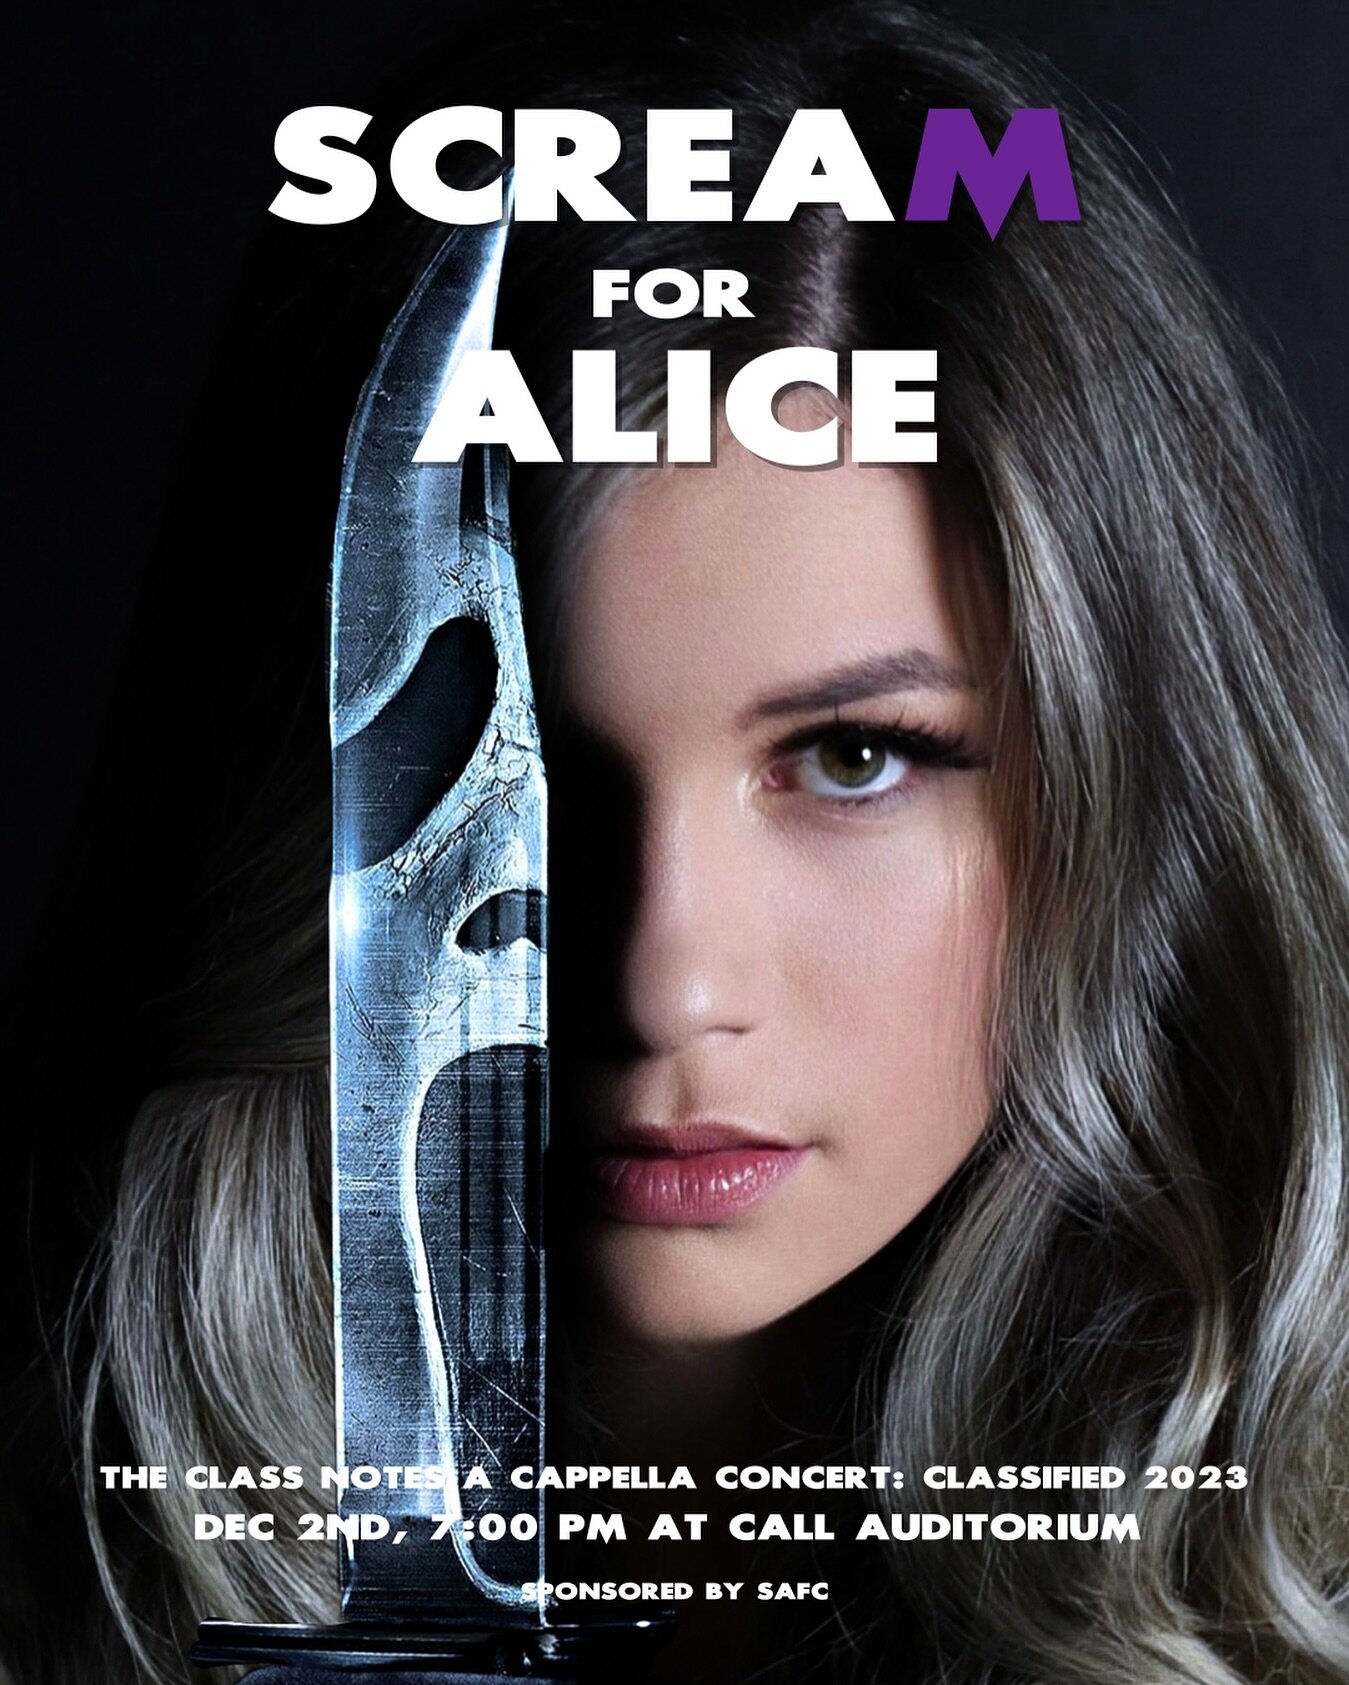 Last but certainly not least, SCREAM for ALICE and the Class Notes at our fall concert TOMORROW, December 2nd at 7 PM in Call Auditorium. Get your ticket through the link in our bio or DM us.